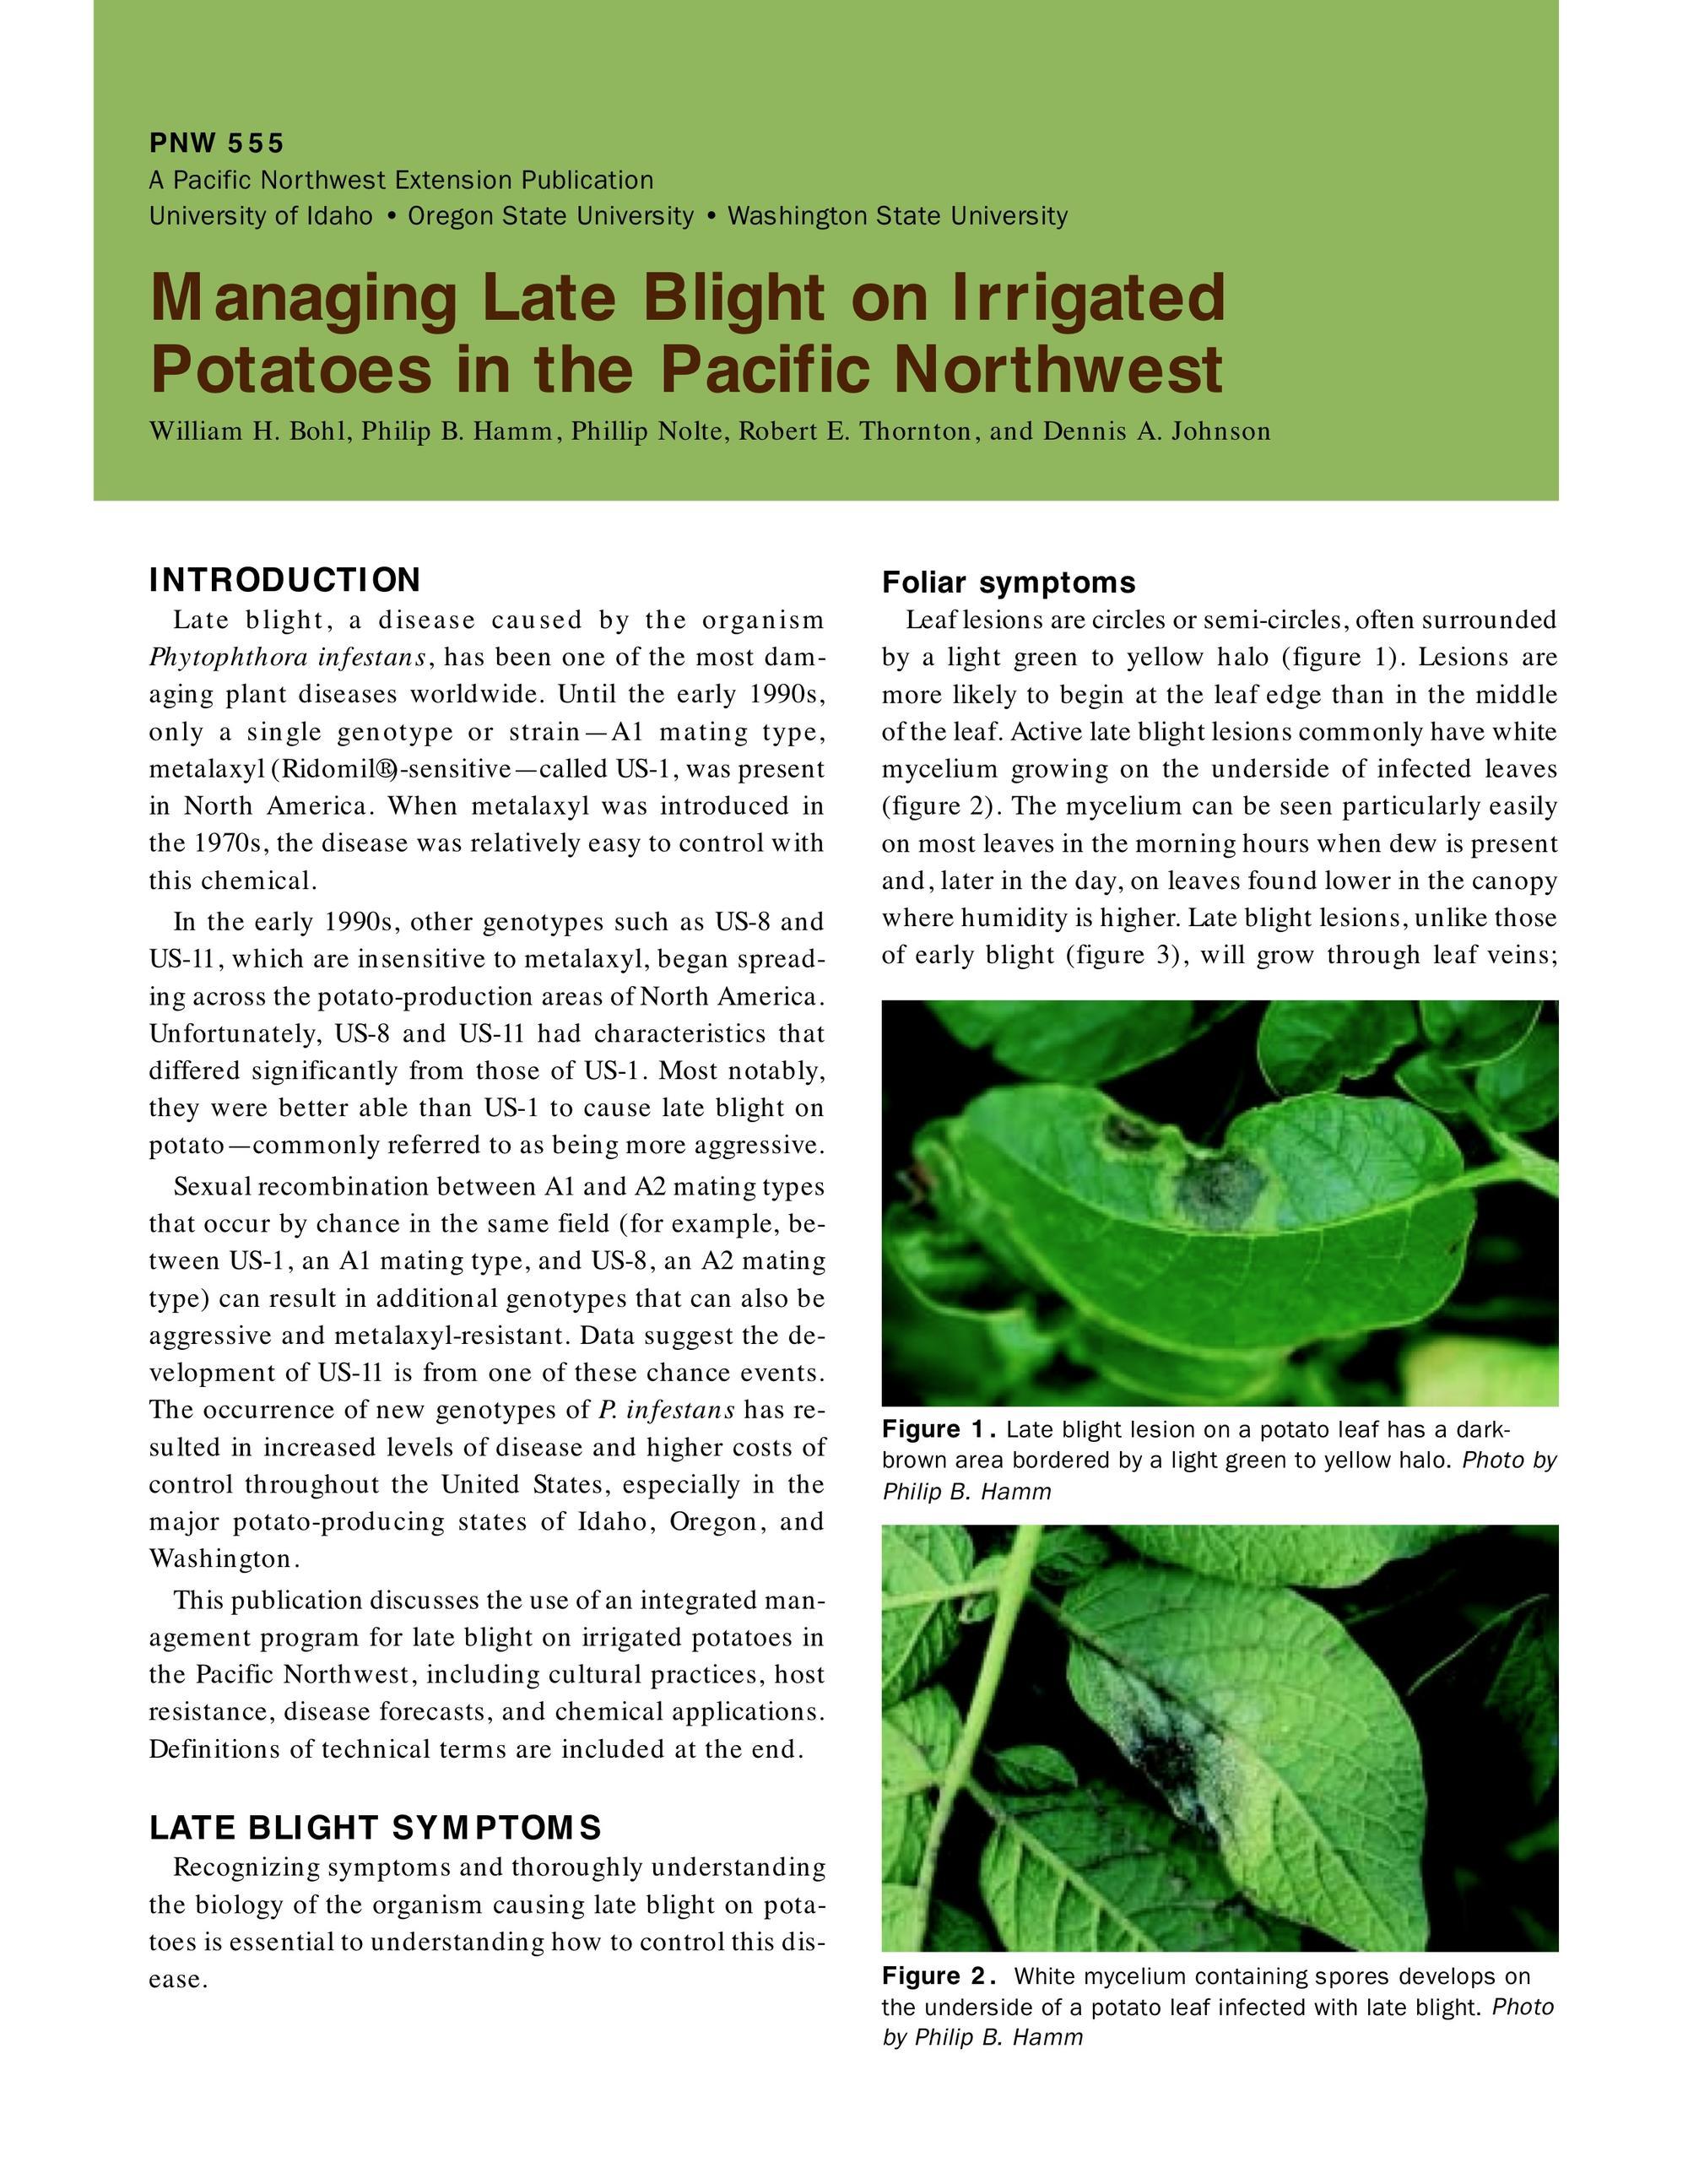 Image of Managing Late Blight on Irrigated Potatoes in the Pacific Northwest publication